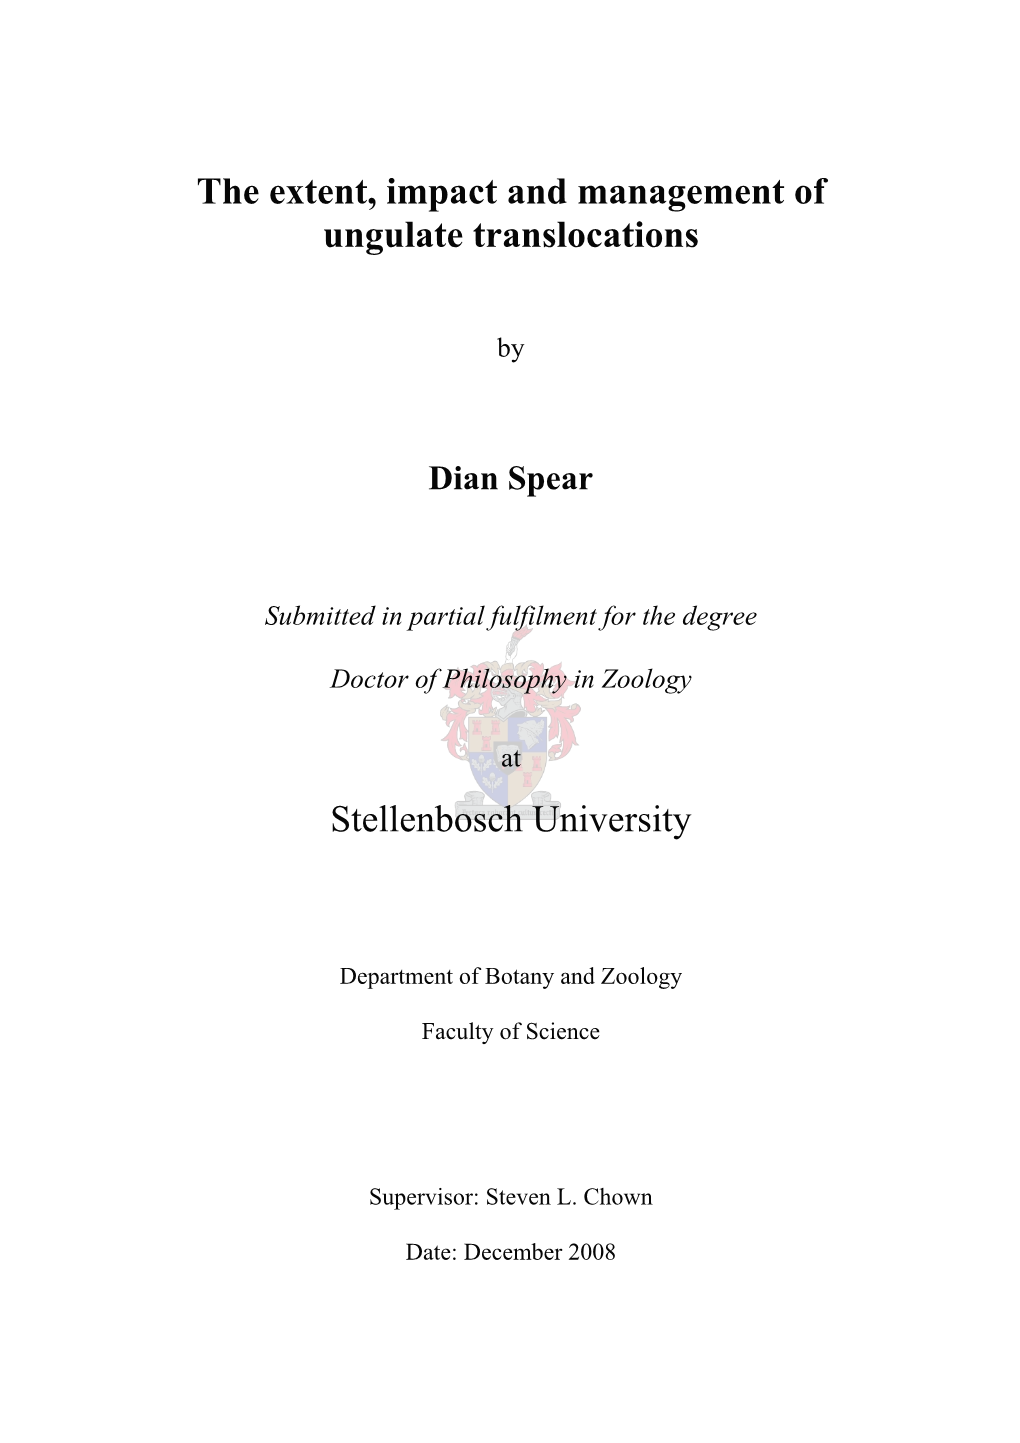 The Extent, Impact and Management of Ungulate Translocations